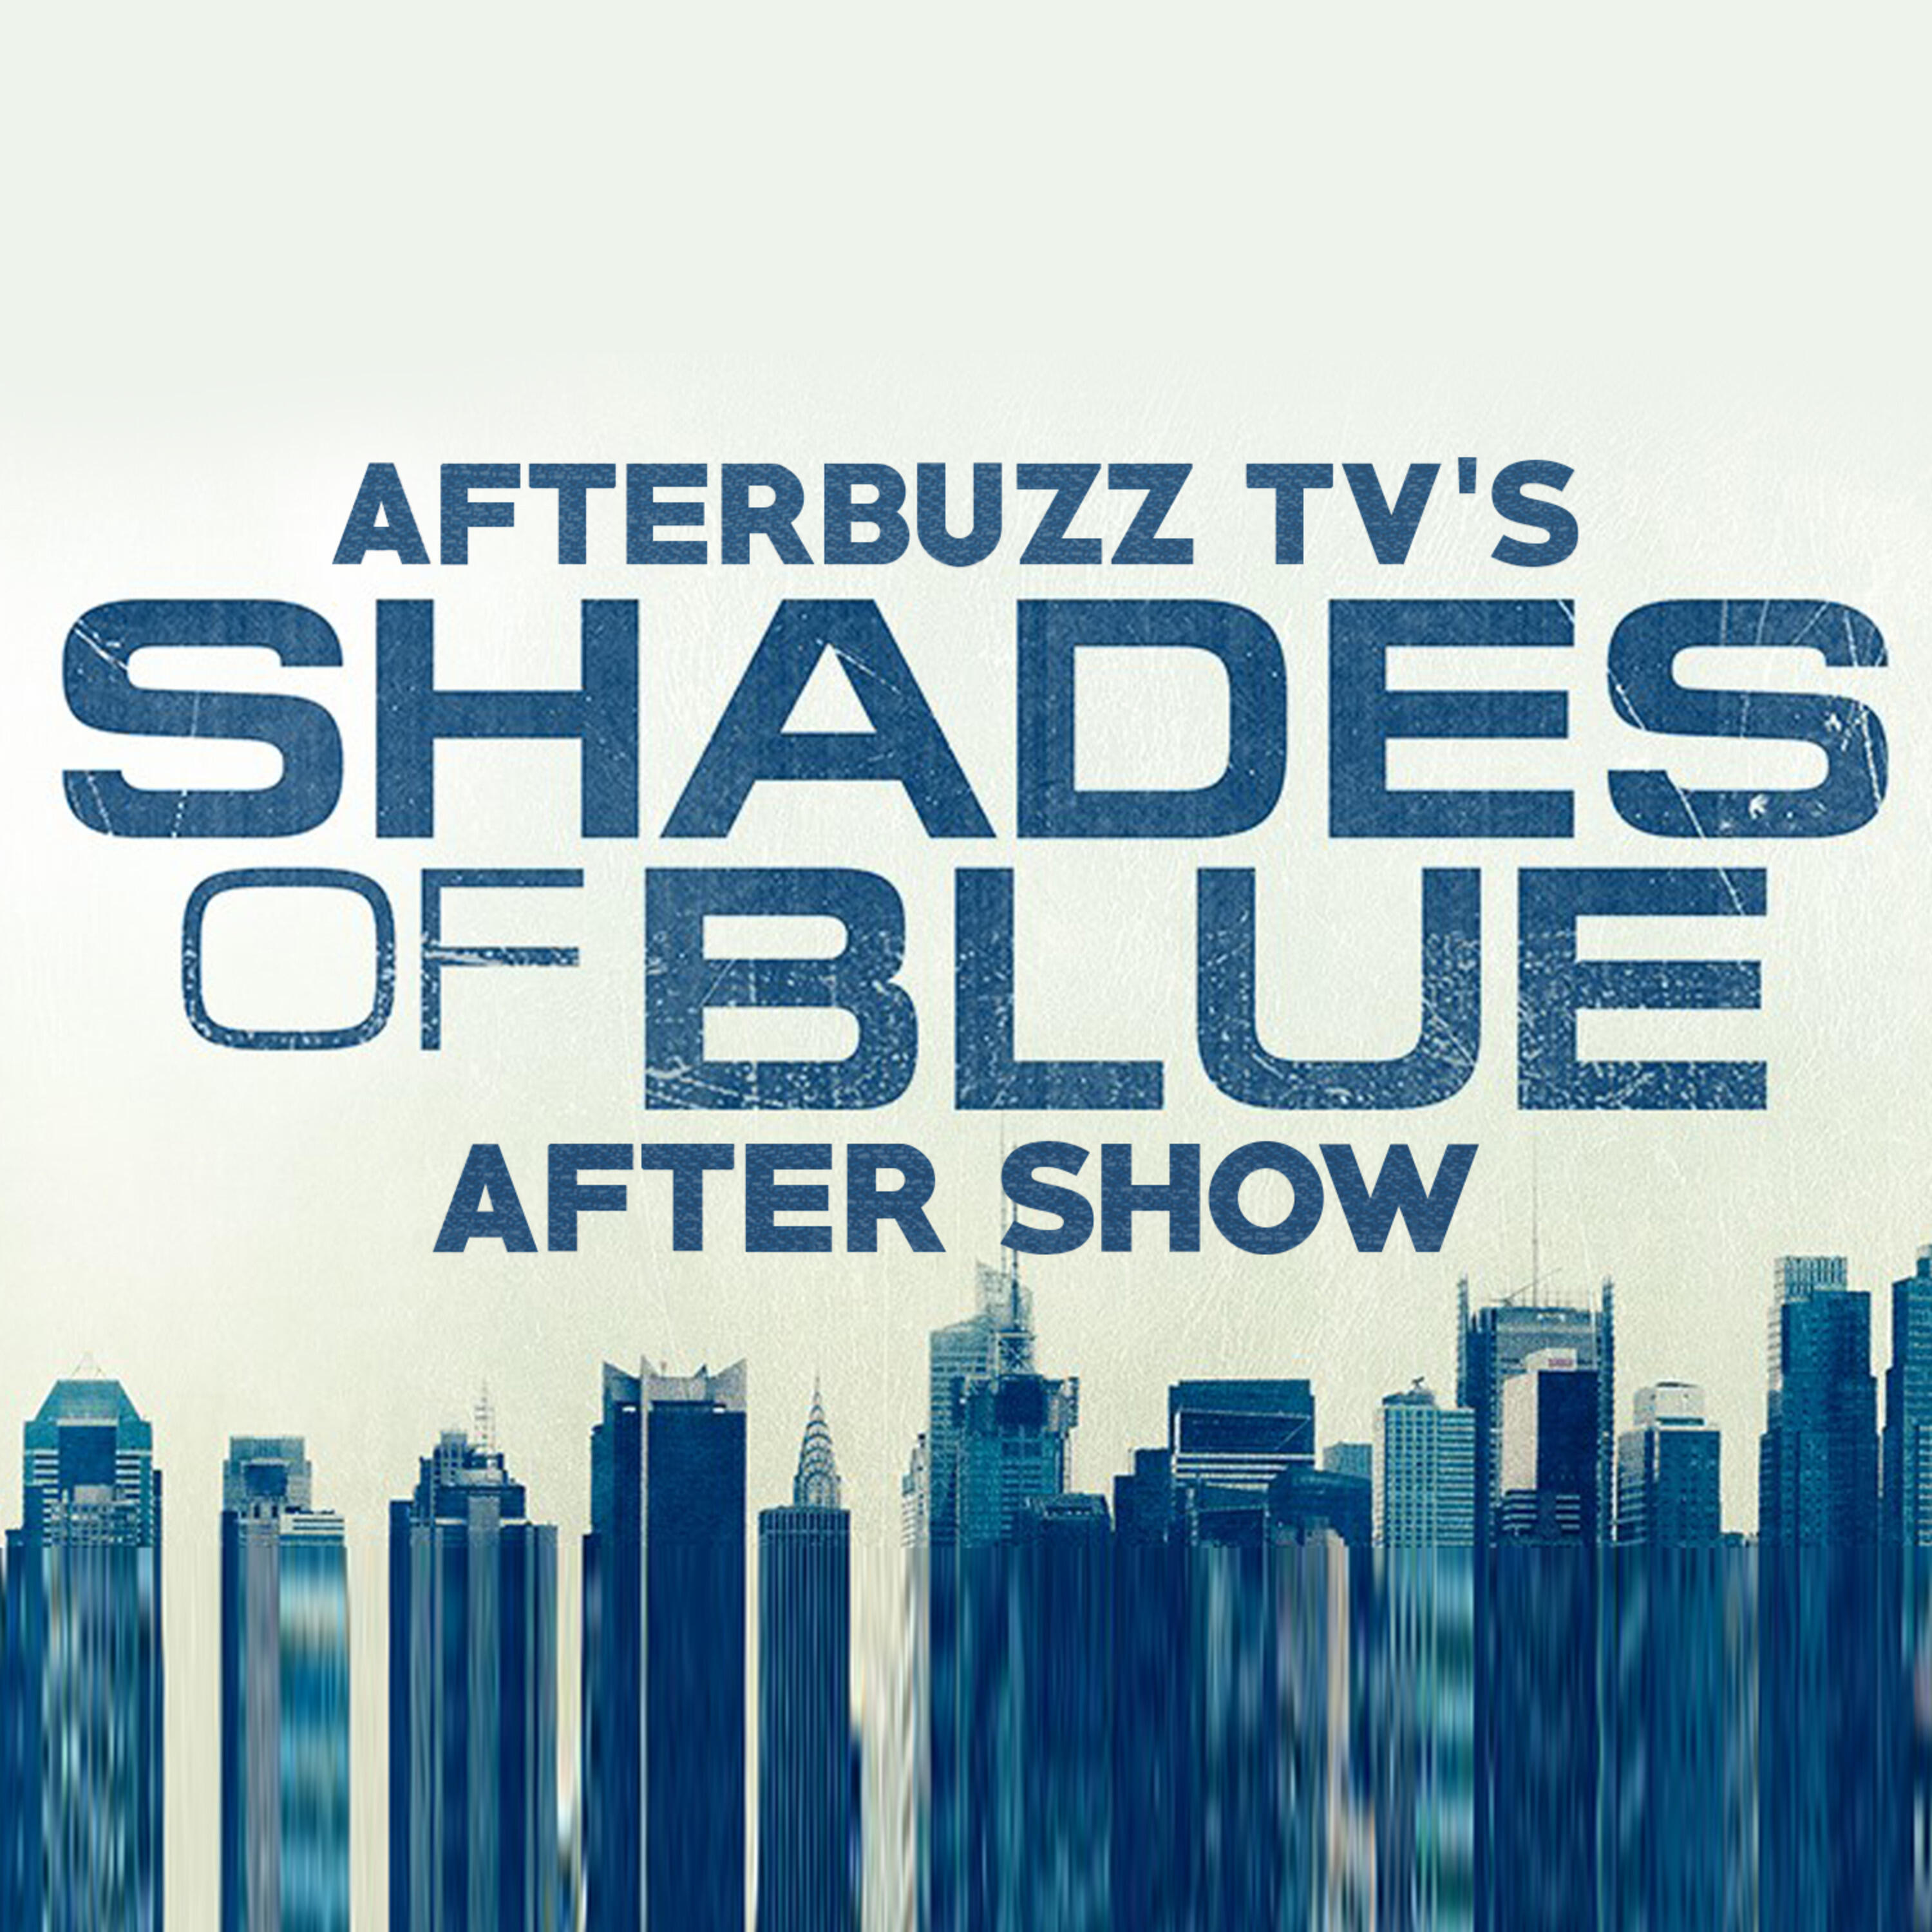 Shades of Blue. AFTERSHOW. After show. Blue one. Blue s better